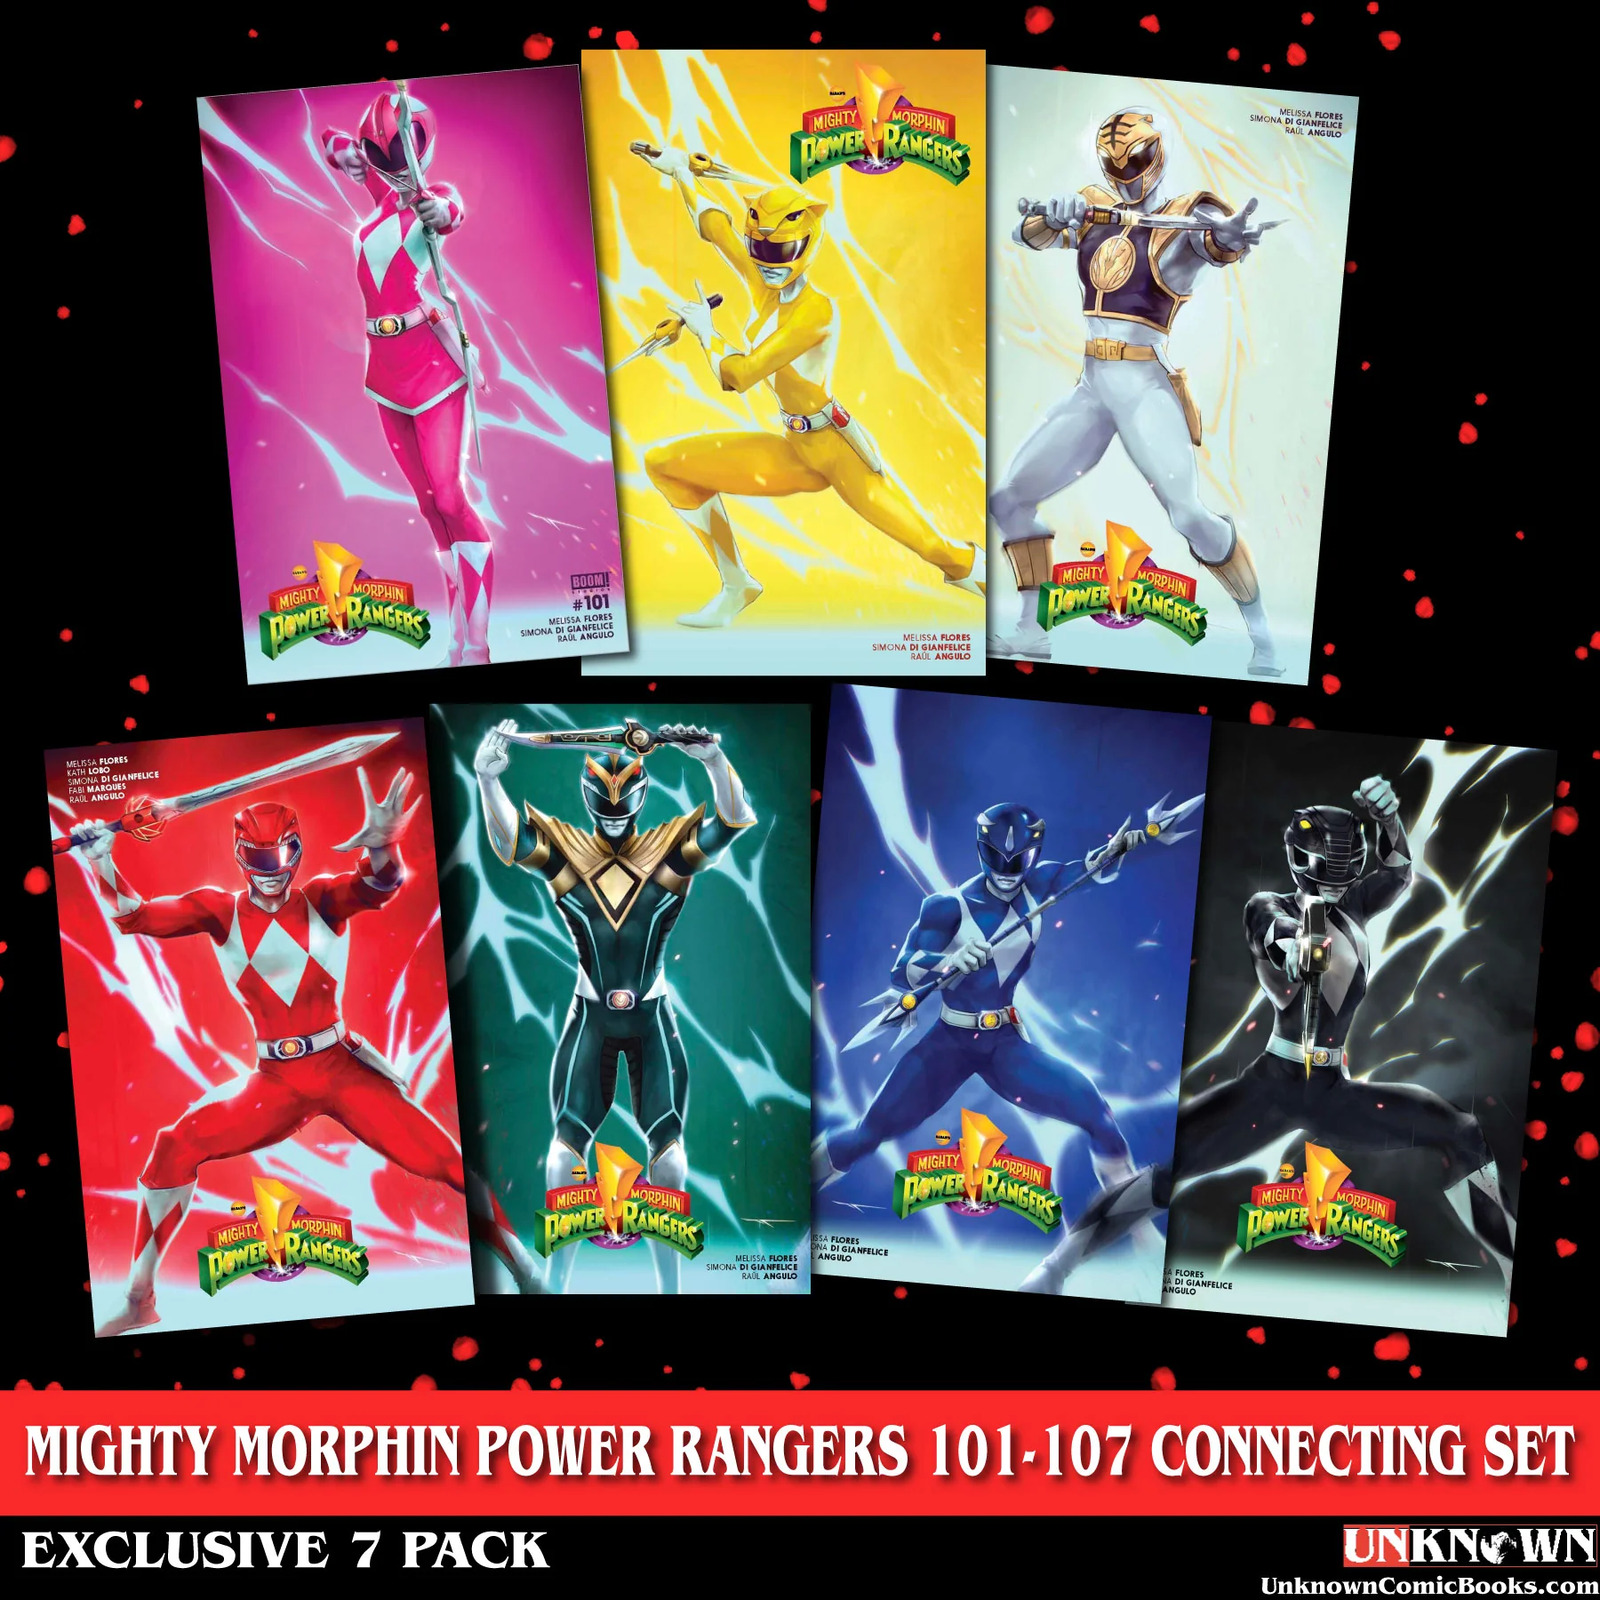 [7 PACK CONNECTING TRADE SET] MIGHTY MORPHIN POWER RANGERS 101, 102, 103, 104, 1